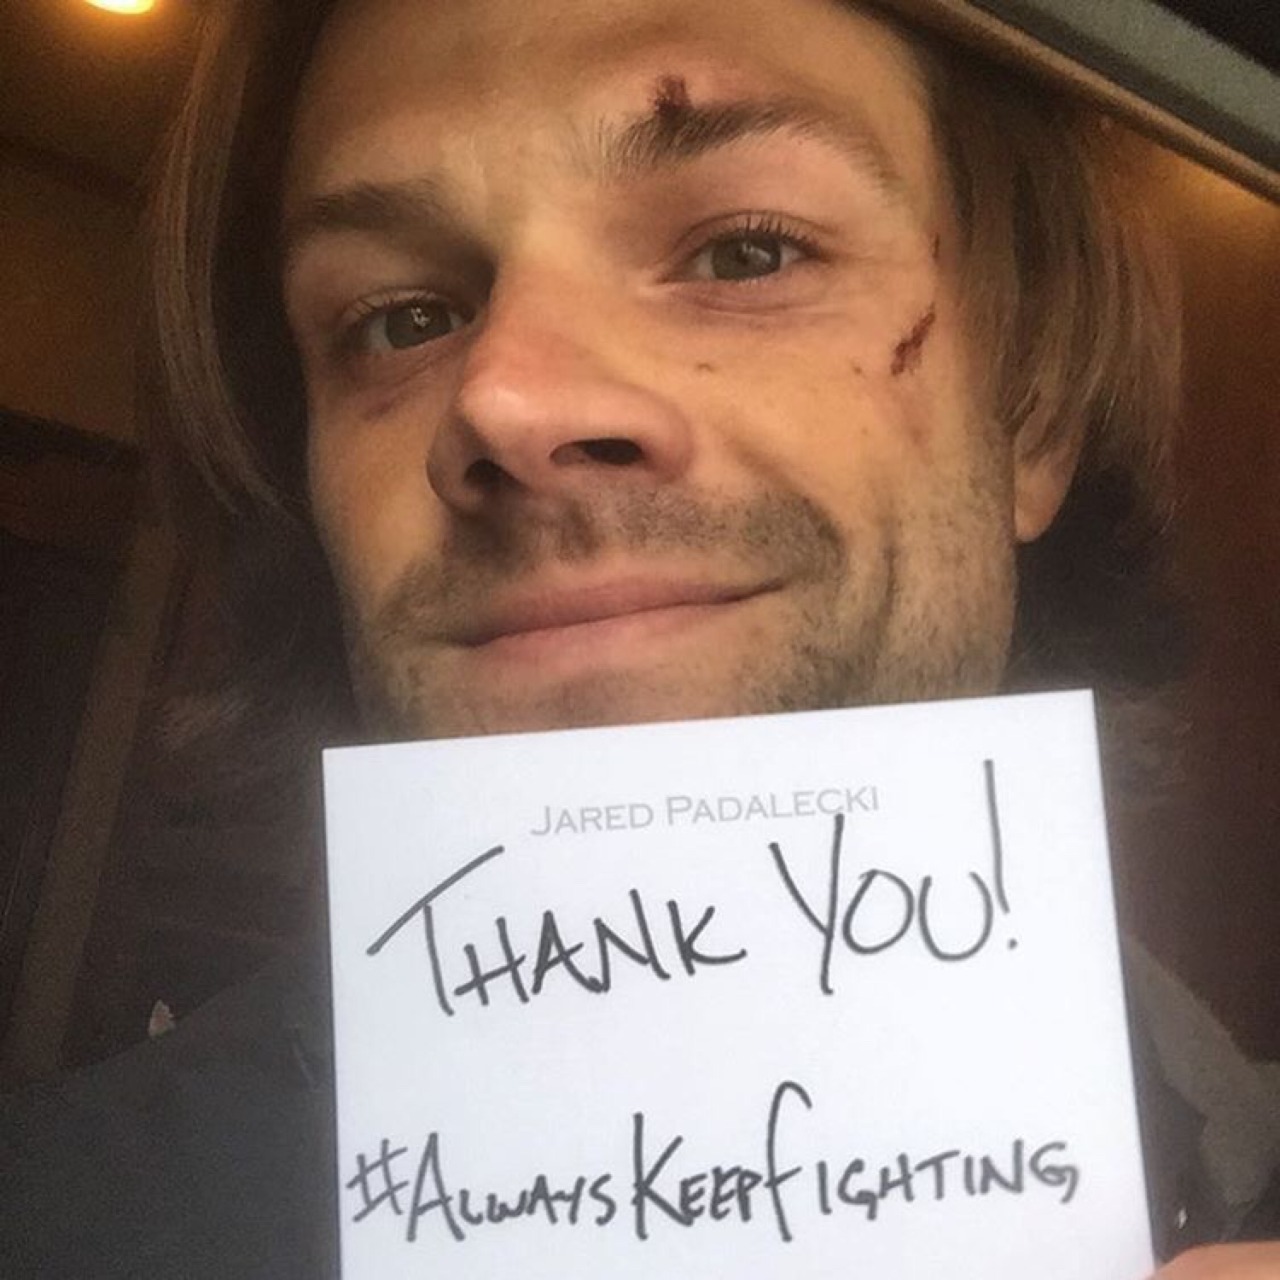 Tattoo uploaded by Noelia  Always Keep Fighting From one of the campaigns  of Jared Padalecki from Supernatural  Tattoodo